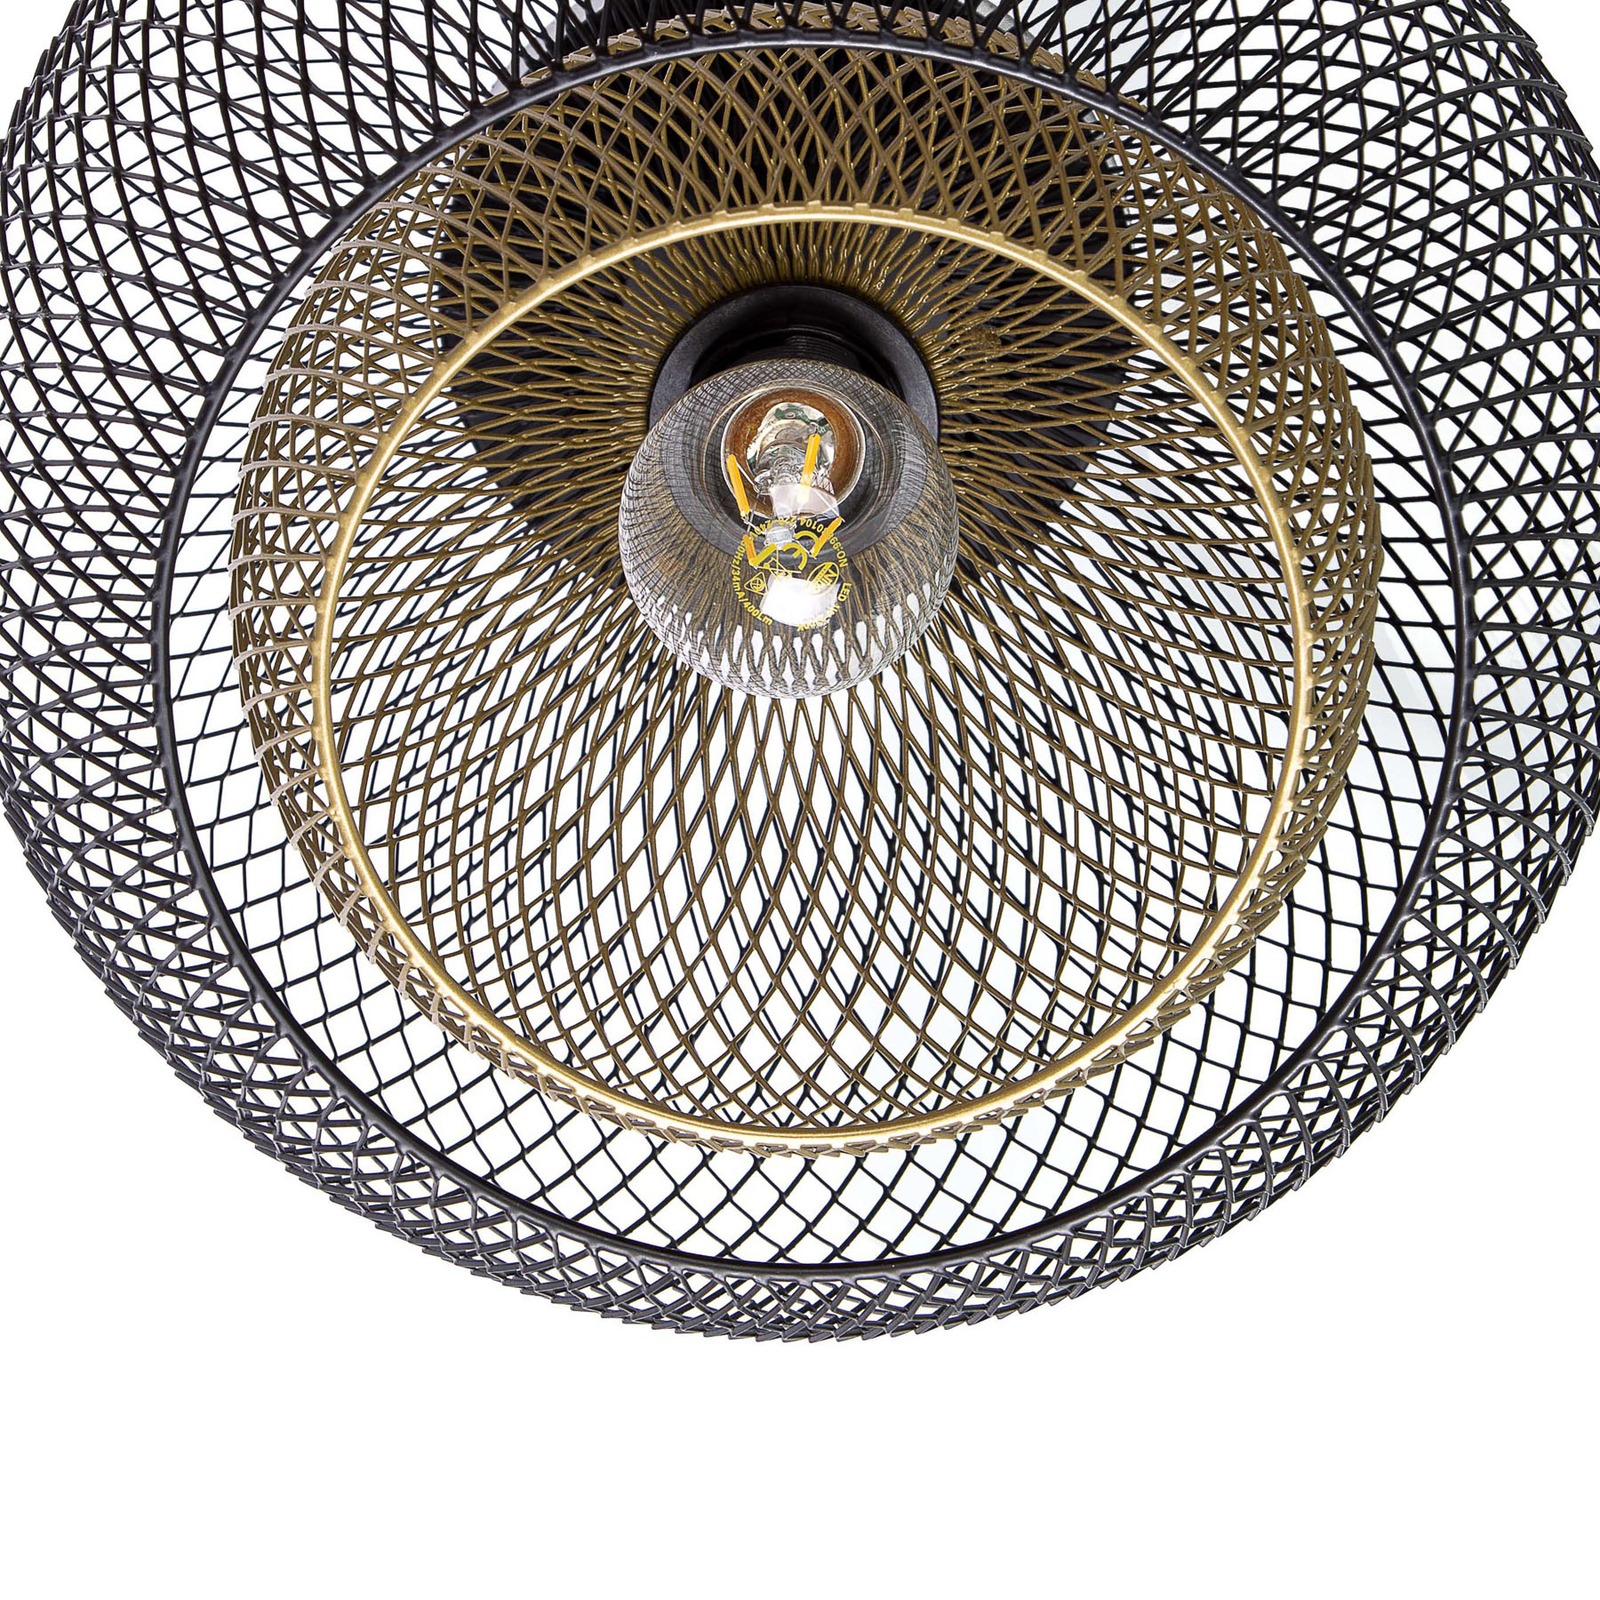 Selina ceiling light with a double wire lampshade